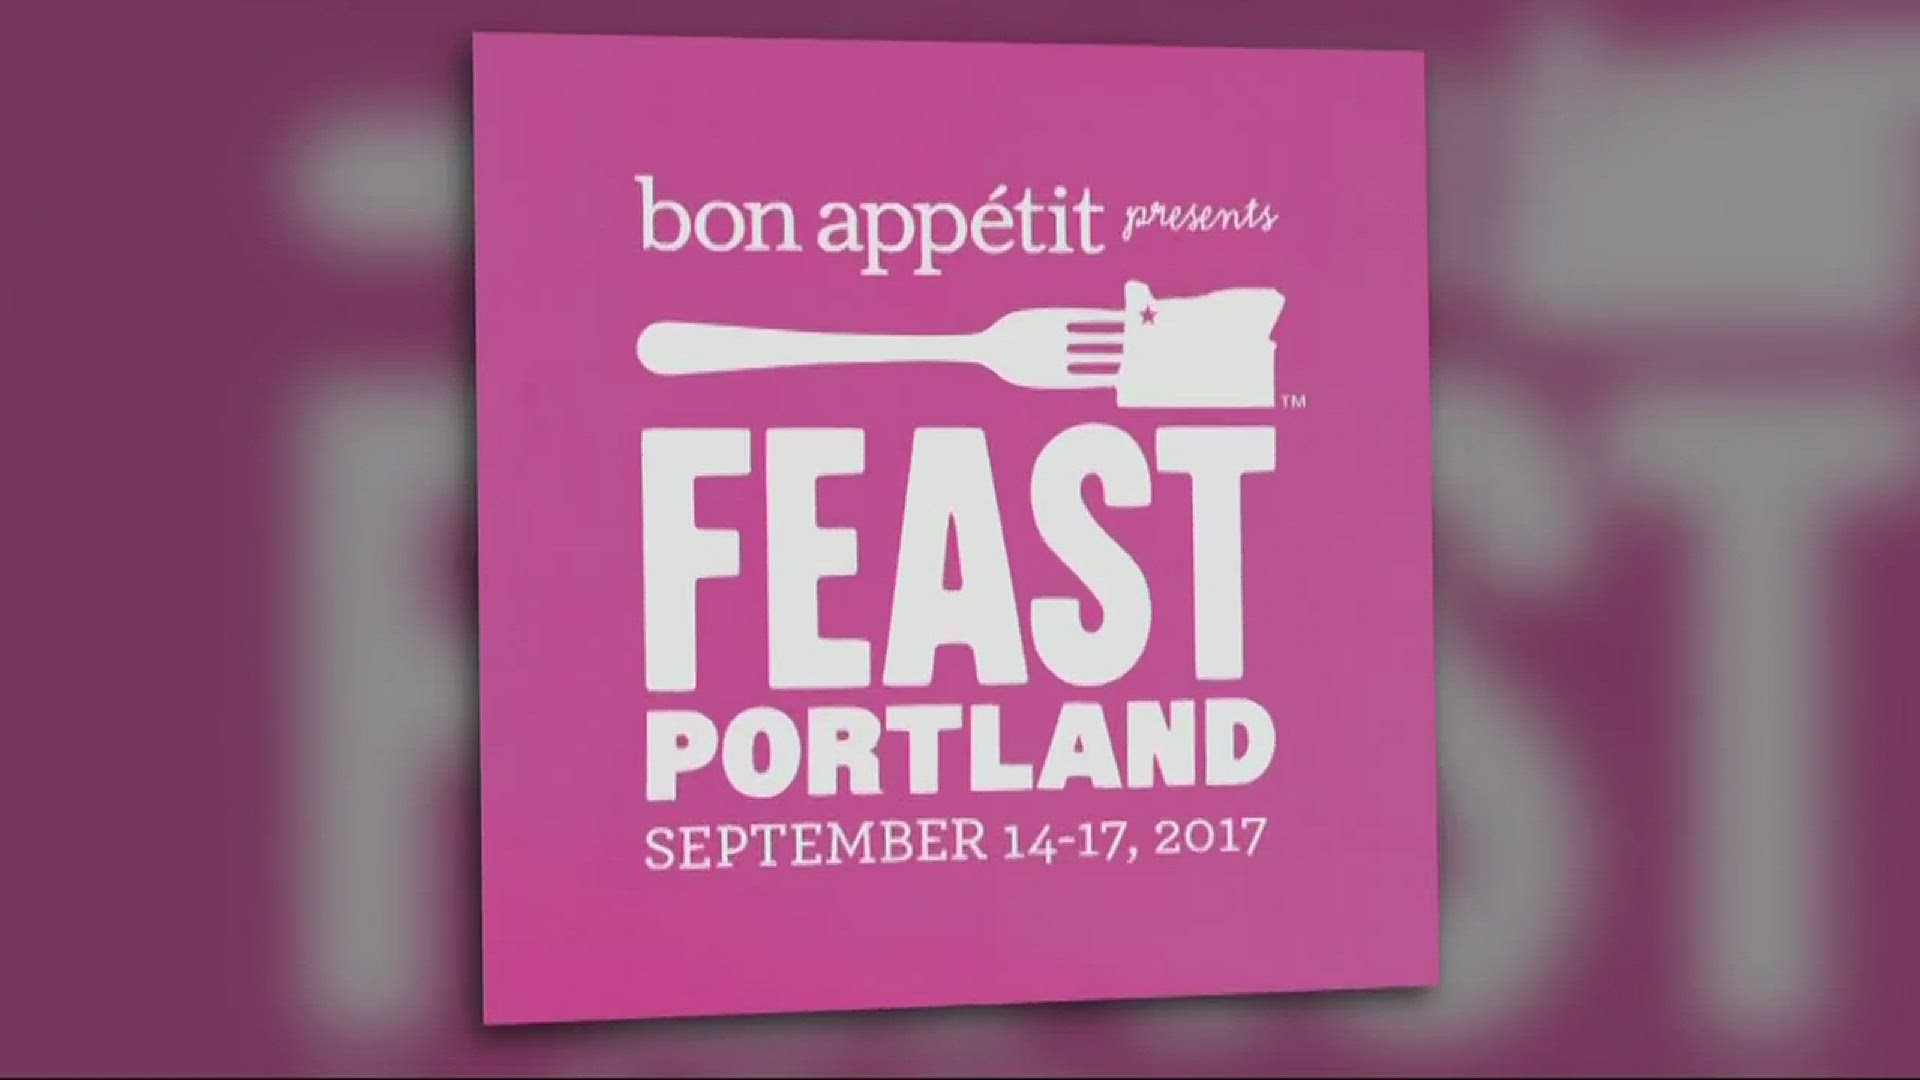 'Feast Portland' tickets are now on sale